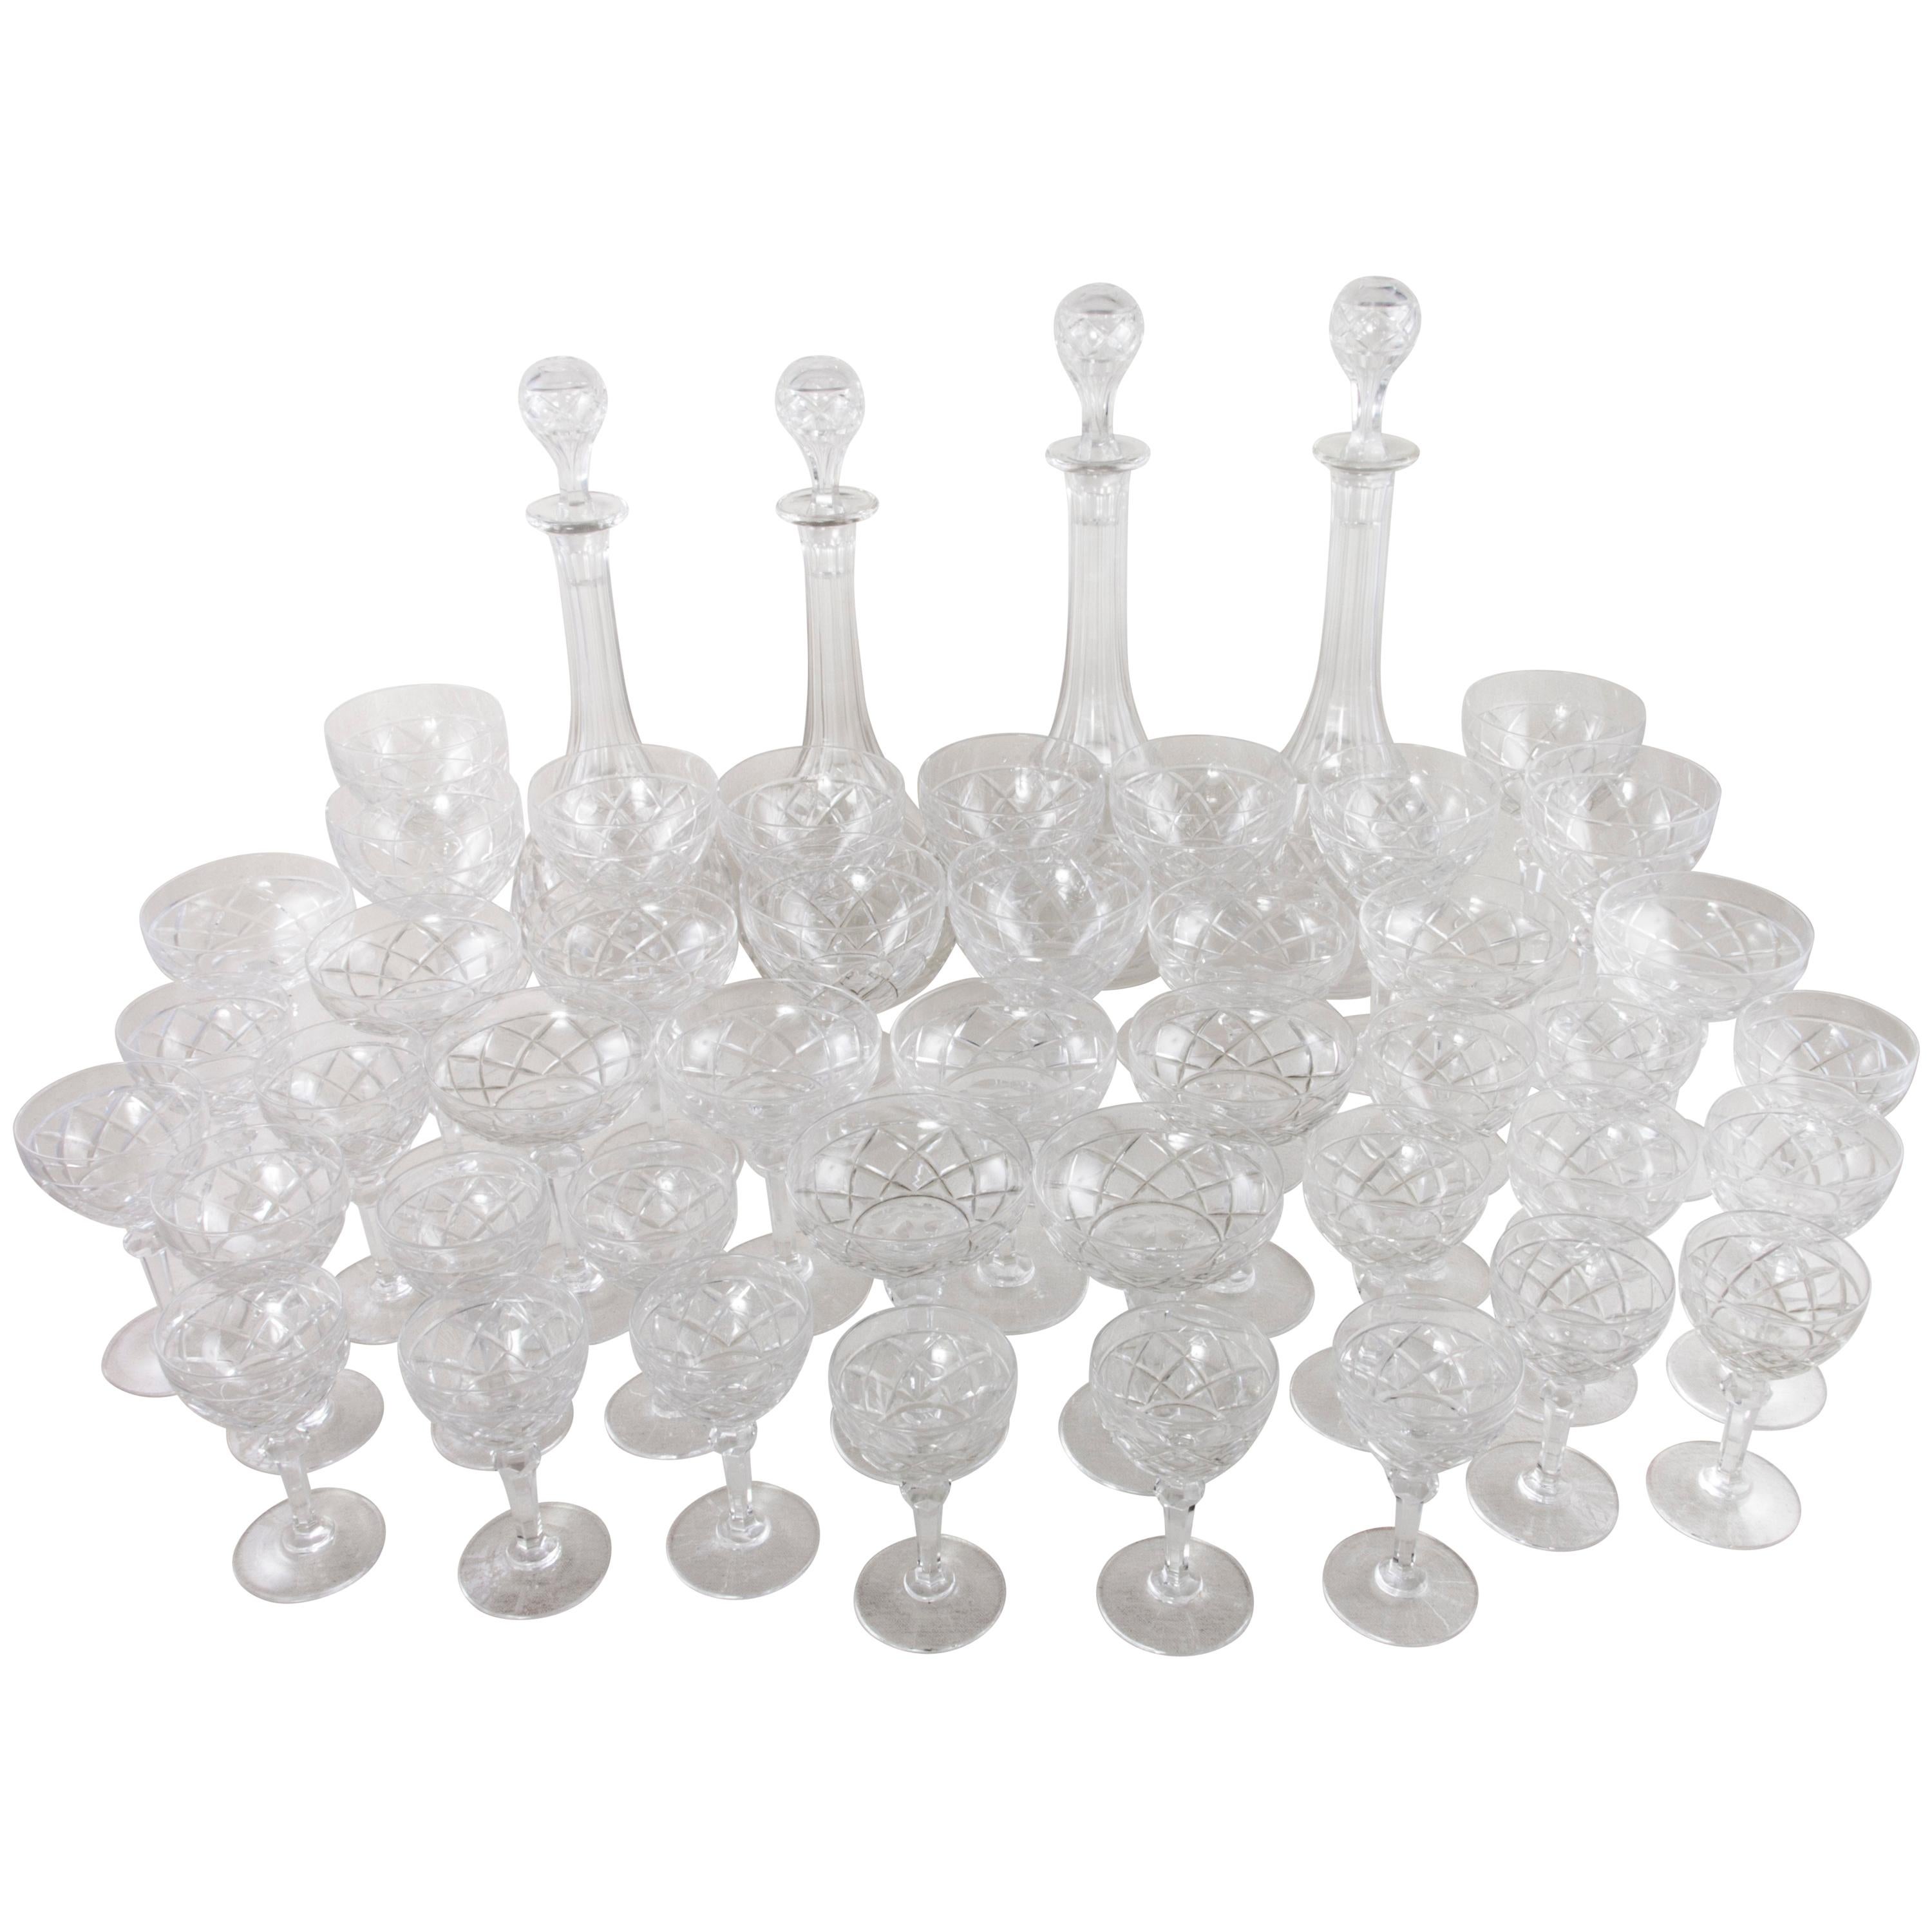 55-Piece Set French Baccarat Crystal Glasses, Decanters, Vases and Bowls